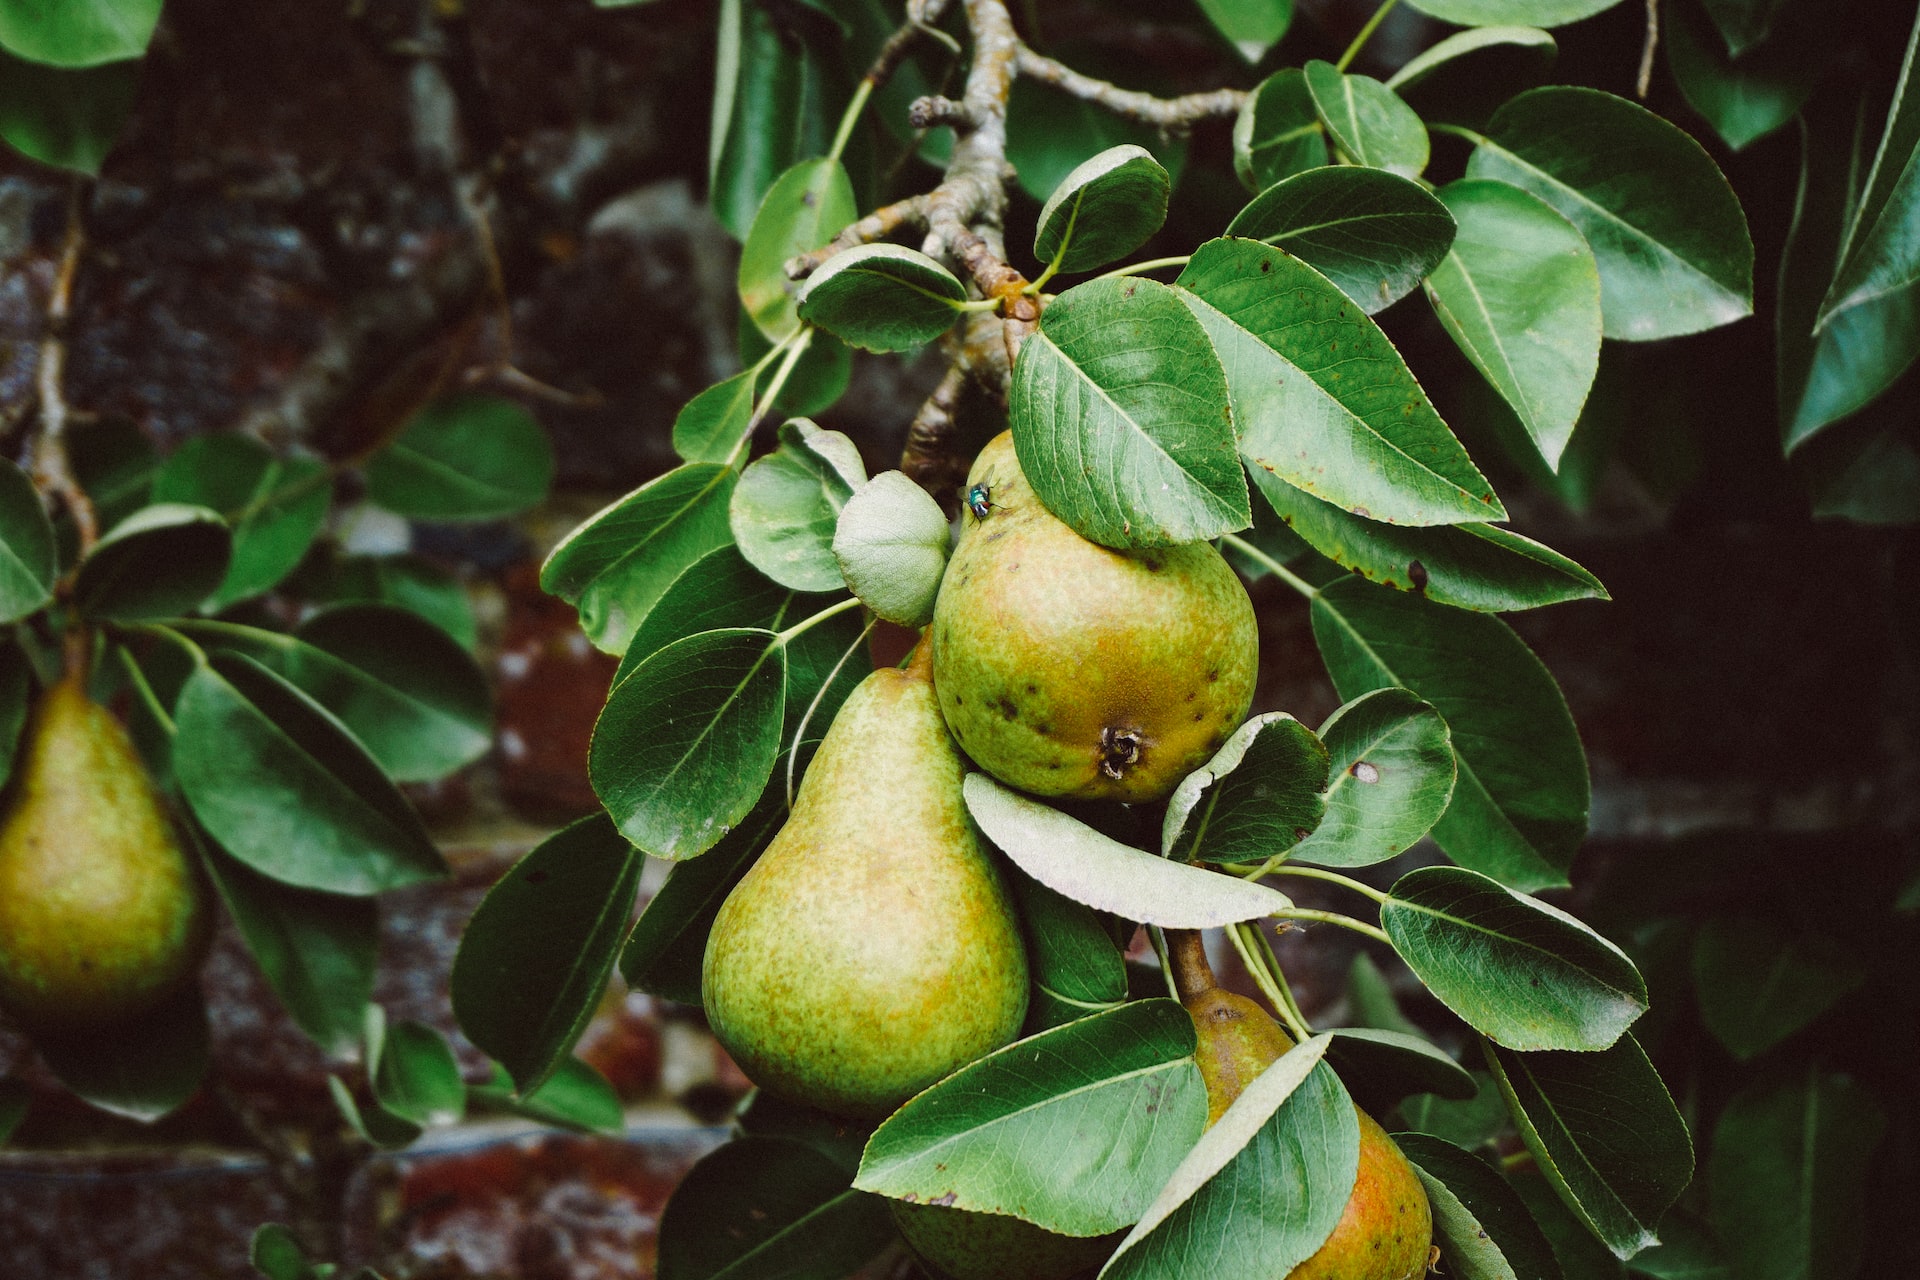 Pears: The Nutritious and Delicious Fruit with a Rich History